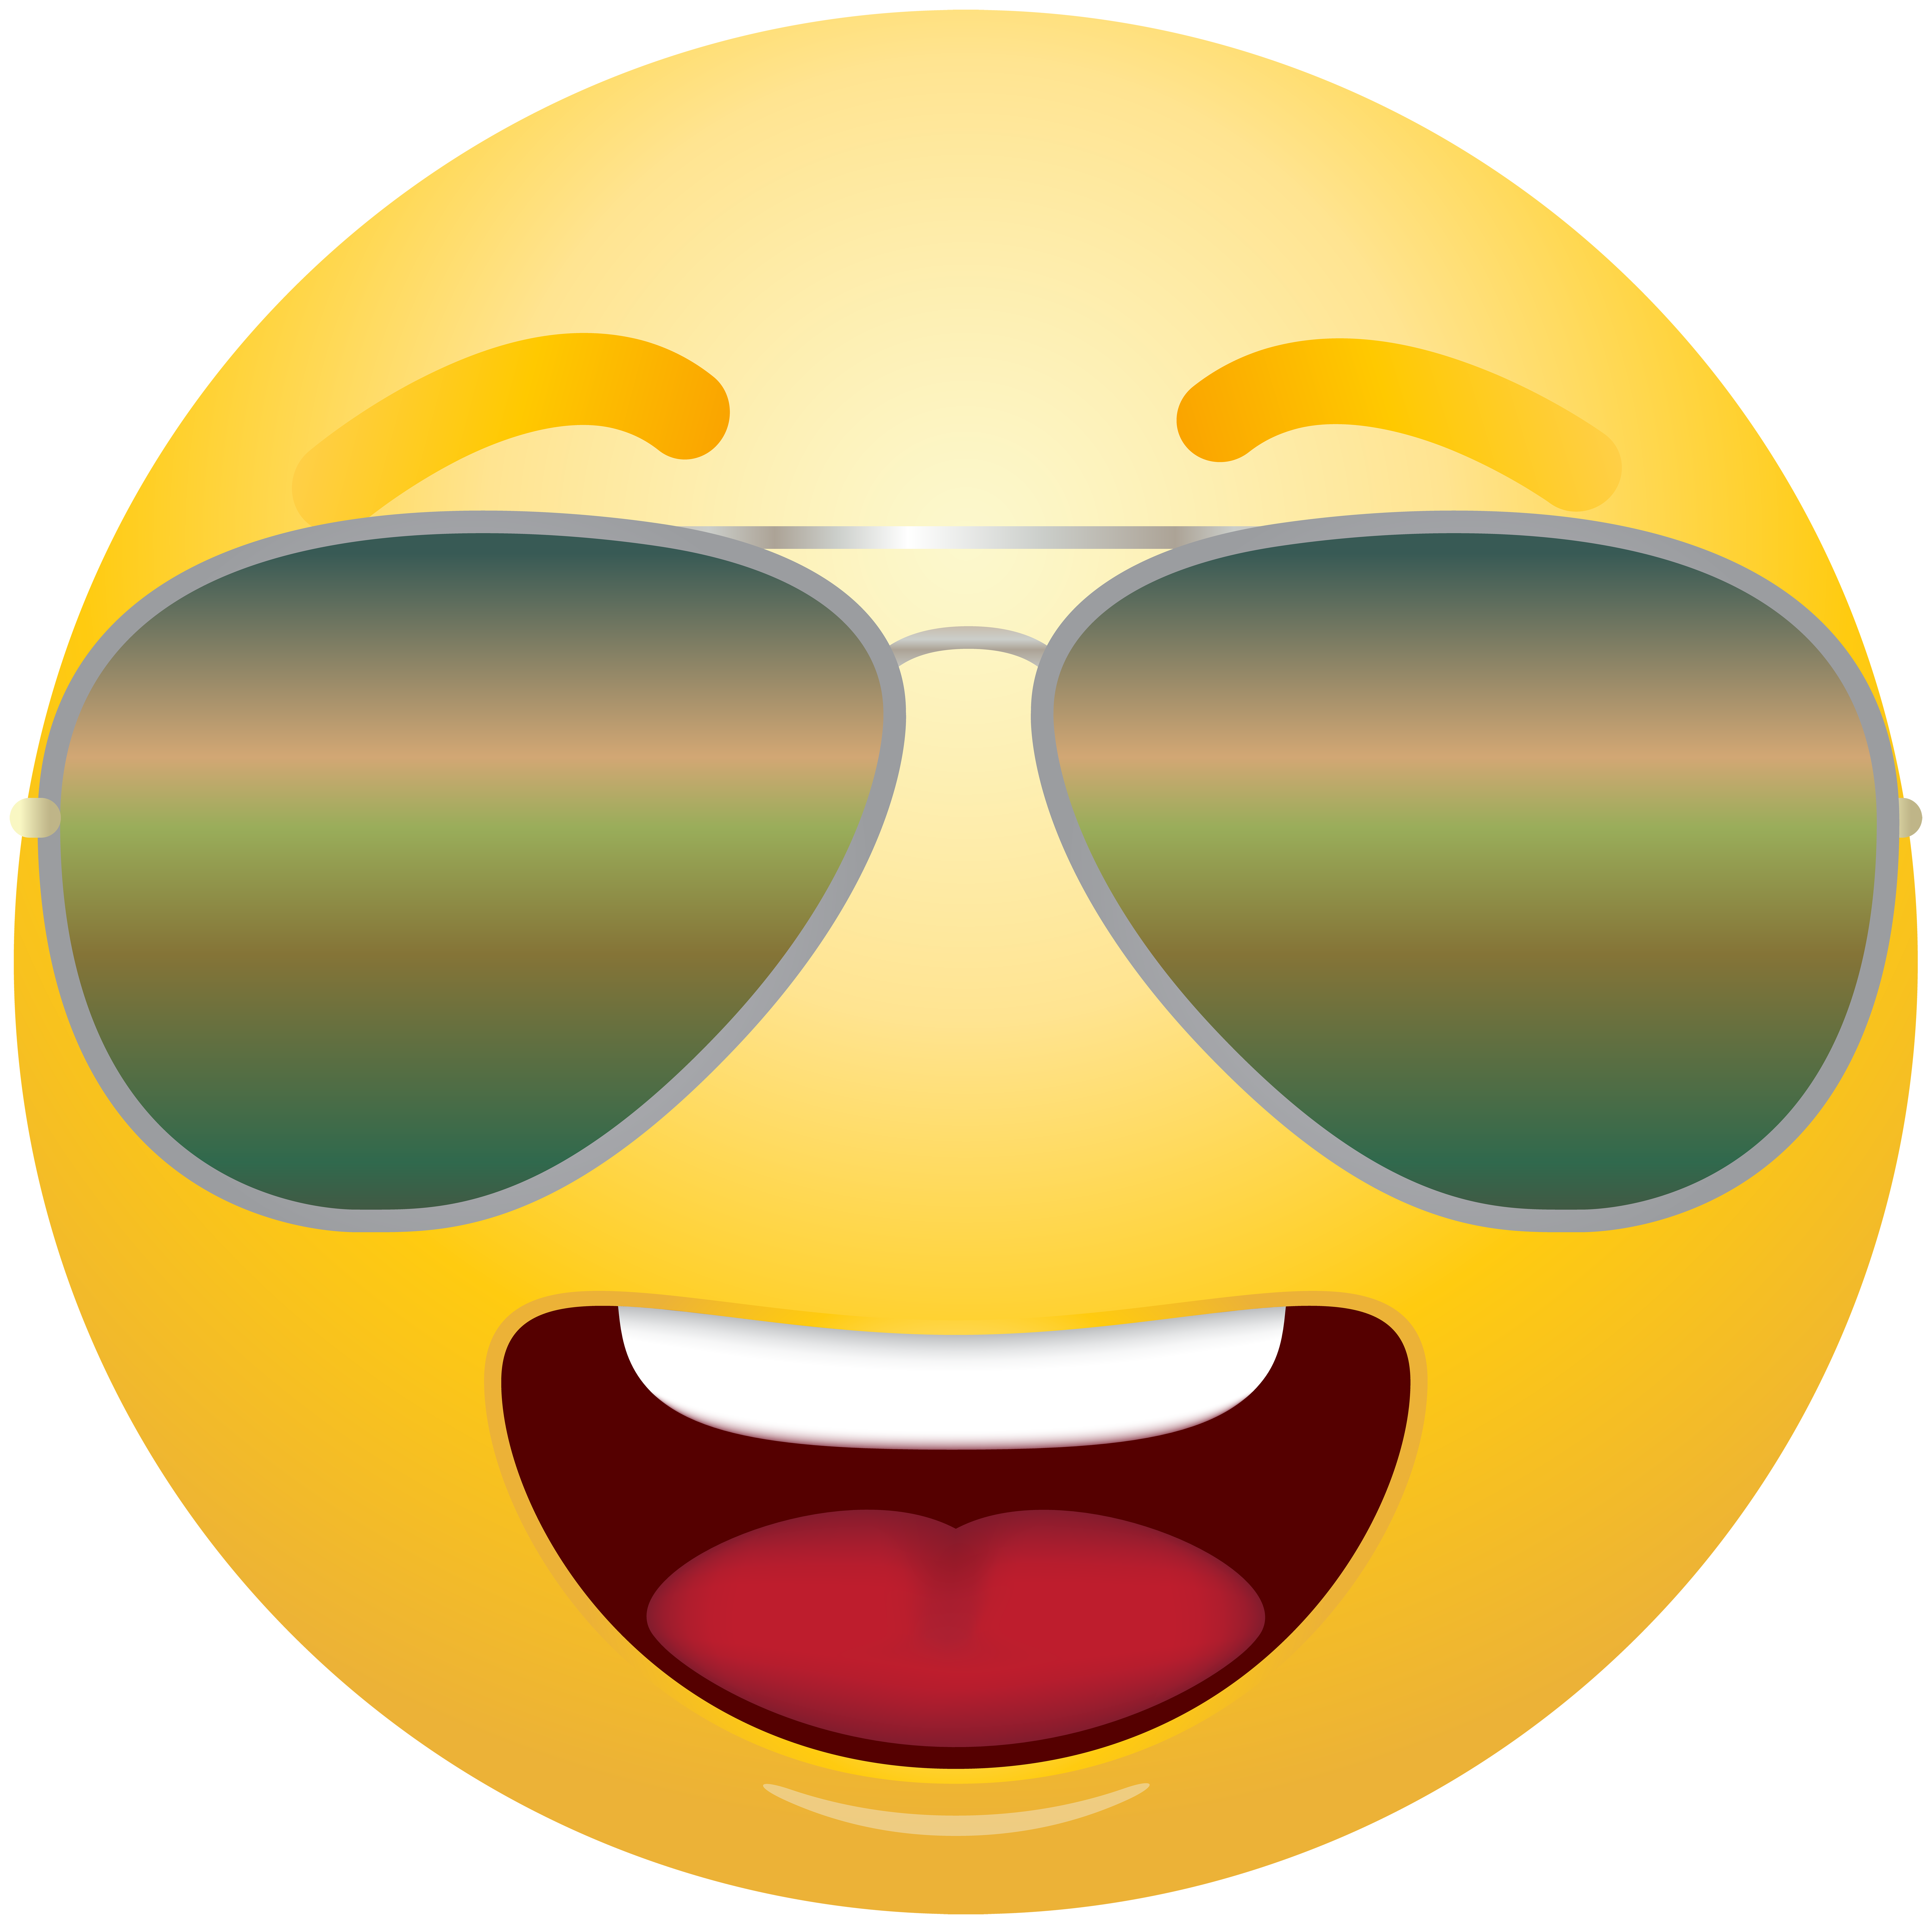 Emoticon With Sunglasses Png Clip Art Best Web Clipart